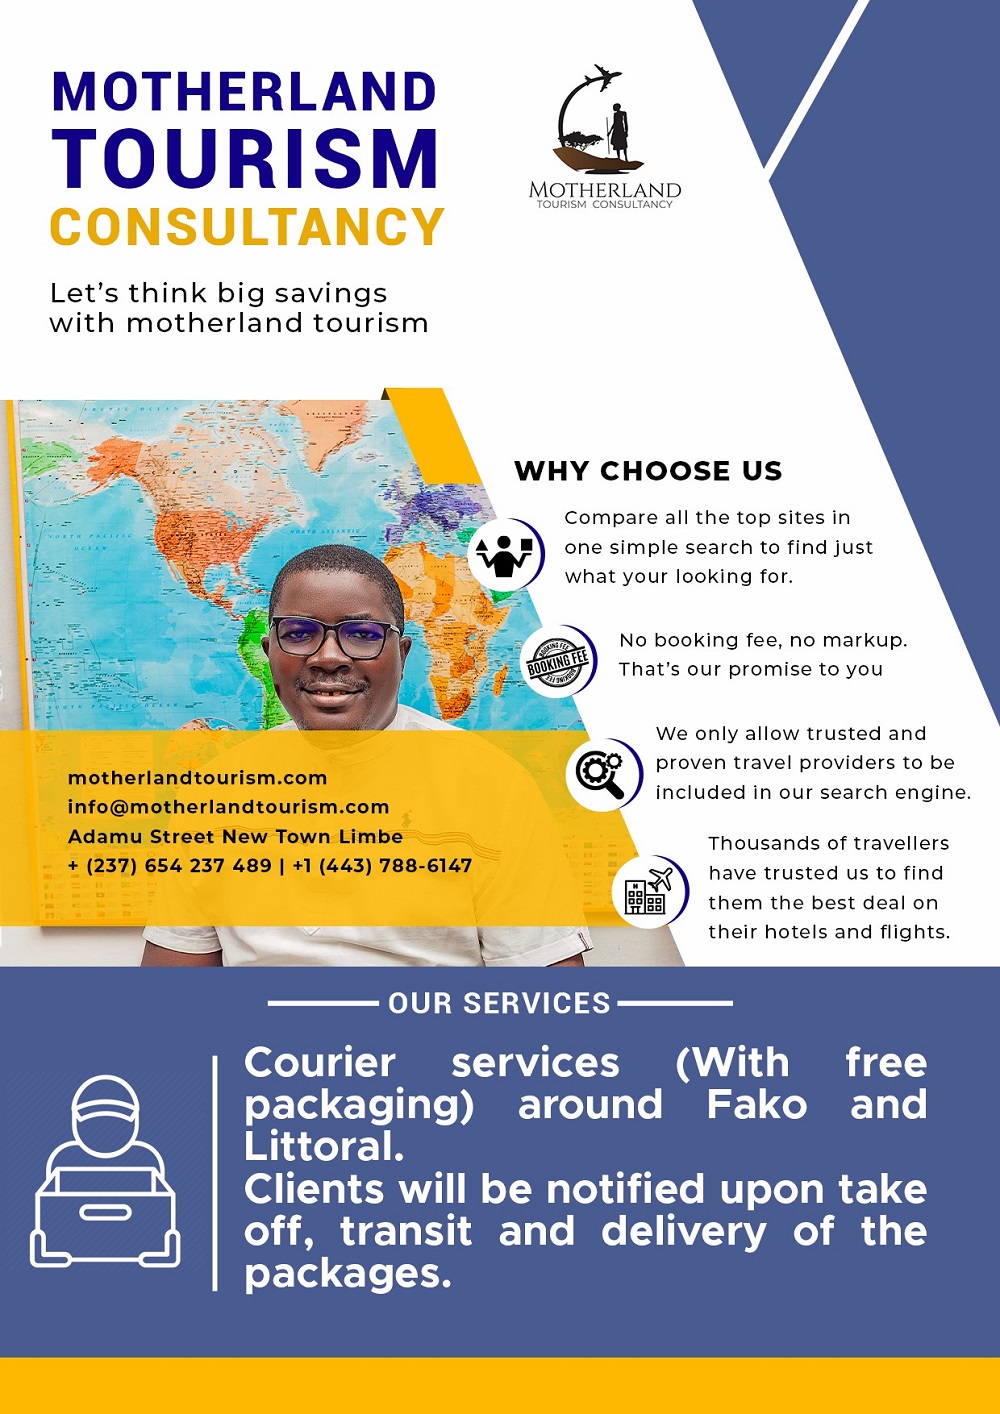 Motherland Tourism Consultancy S.E.O & Content Marketing Webspectron